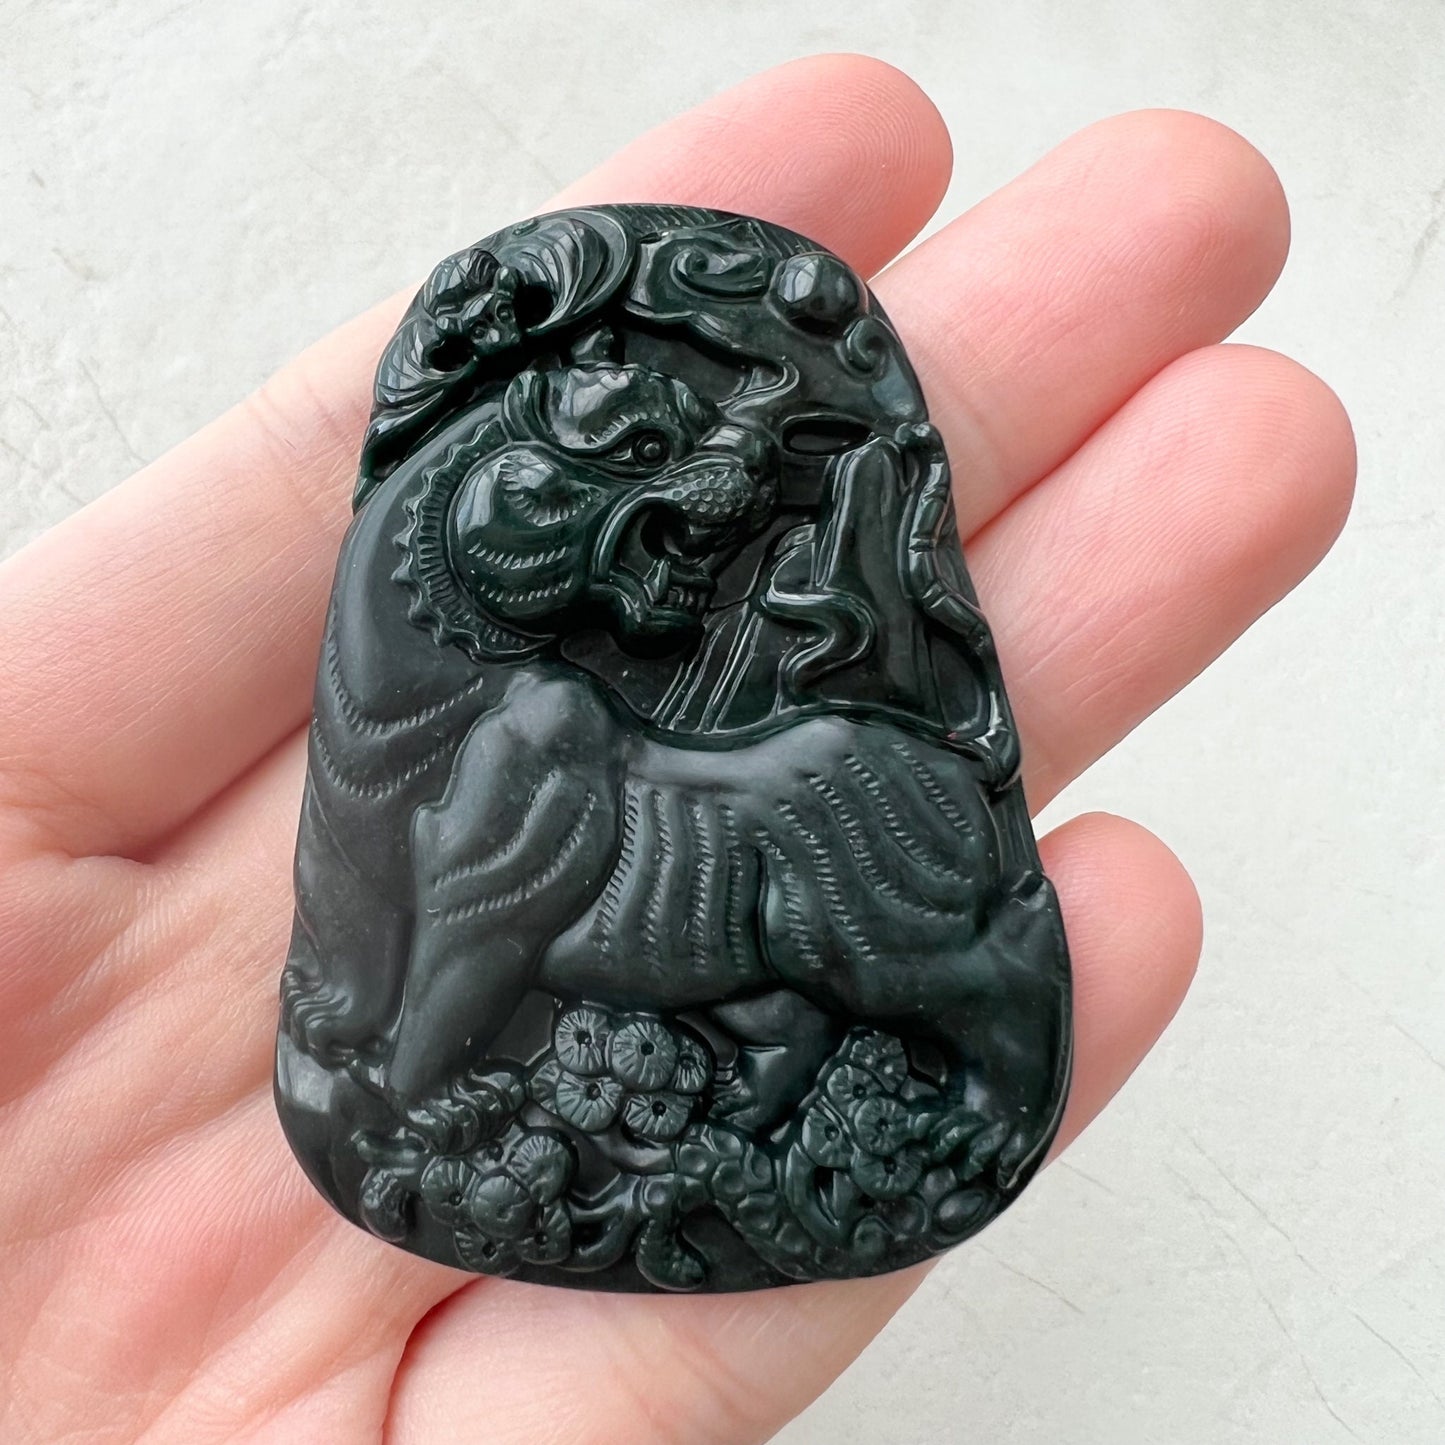 Black Jade Tiger, Jadeite Jade Omphacite, Chinese Zodiac Carved Pendant Necklace, LGG-1221-1646840030 - AriaDesignCollection